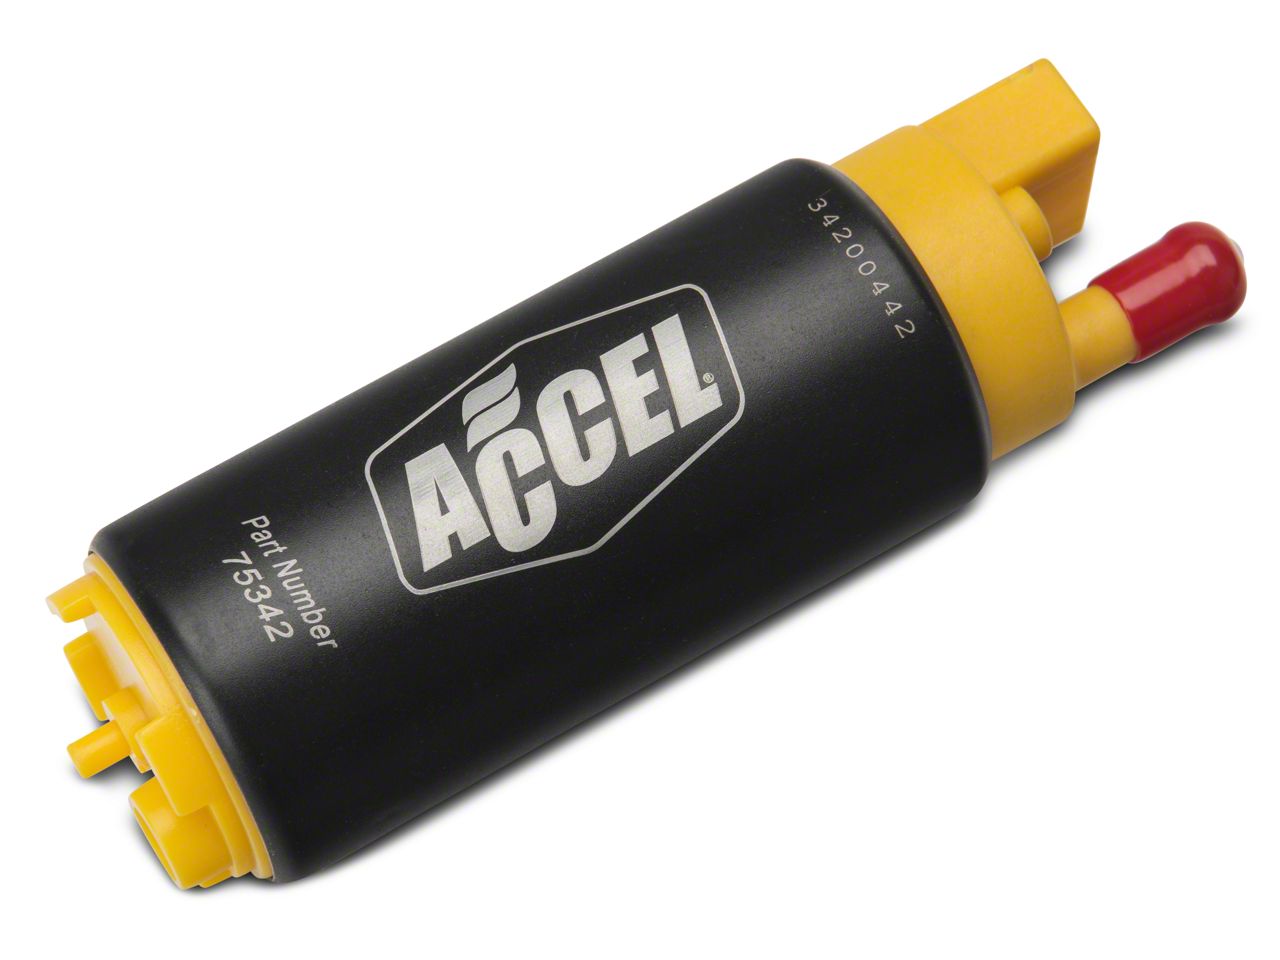 ACCEL 75169 Thruster 500 Series Electric In-Tank Fuel Pump